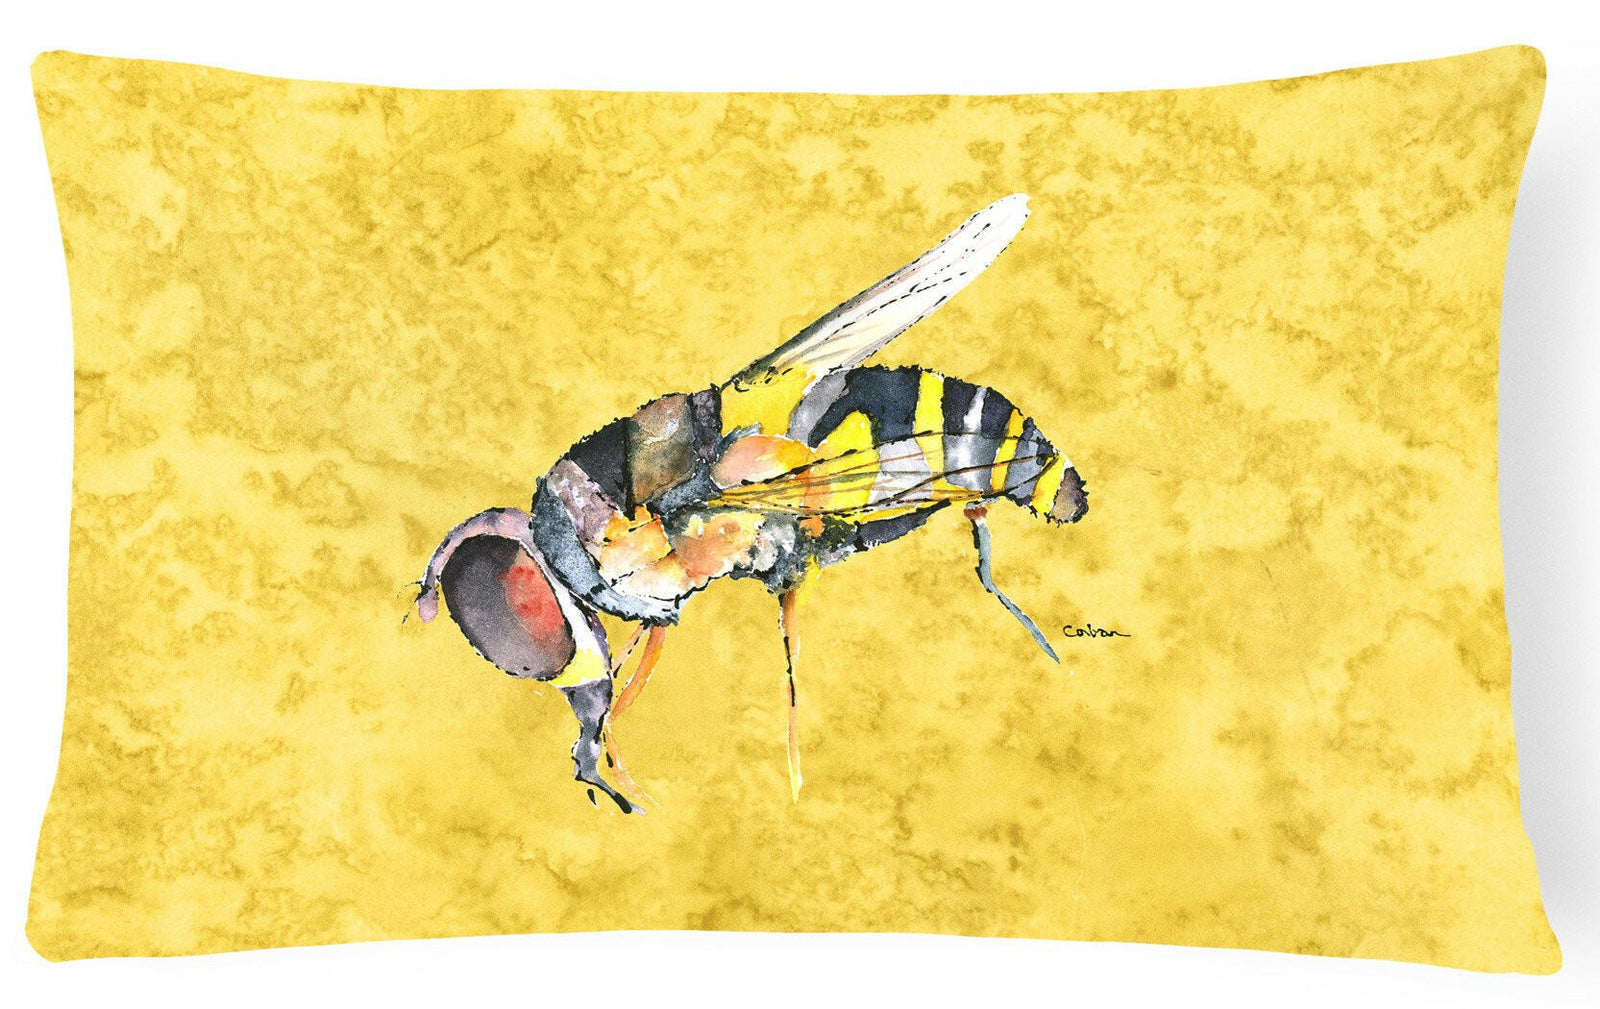 Bee on Yellow   Canvas Fabric Decorative Pillow by Caroline's Treasures